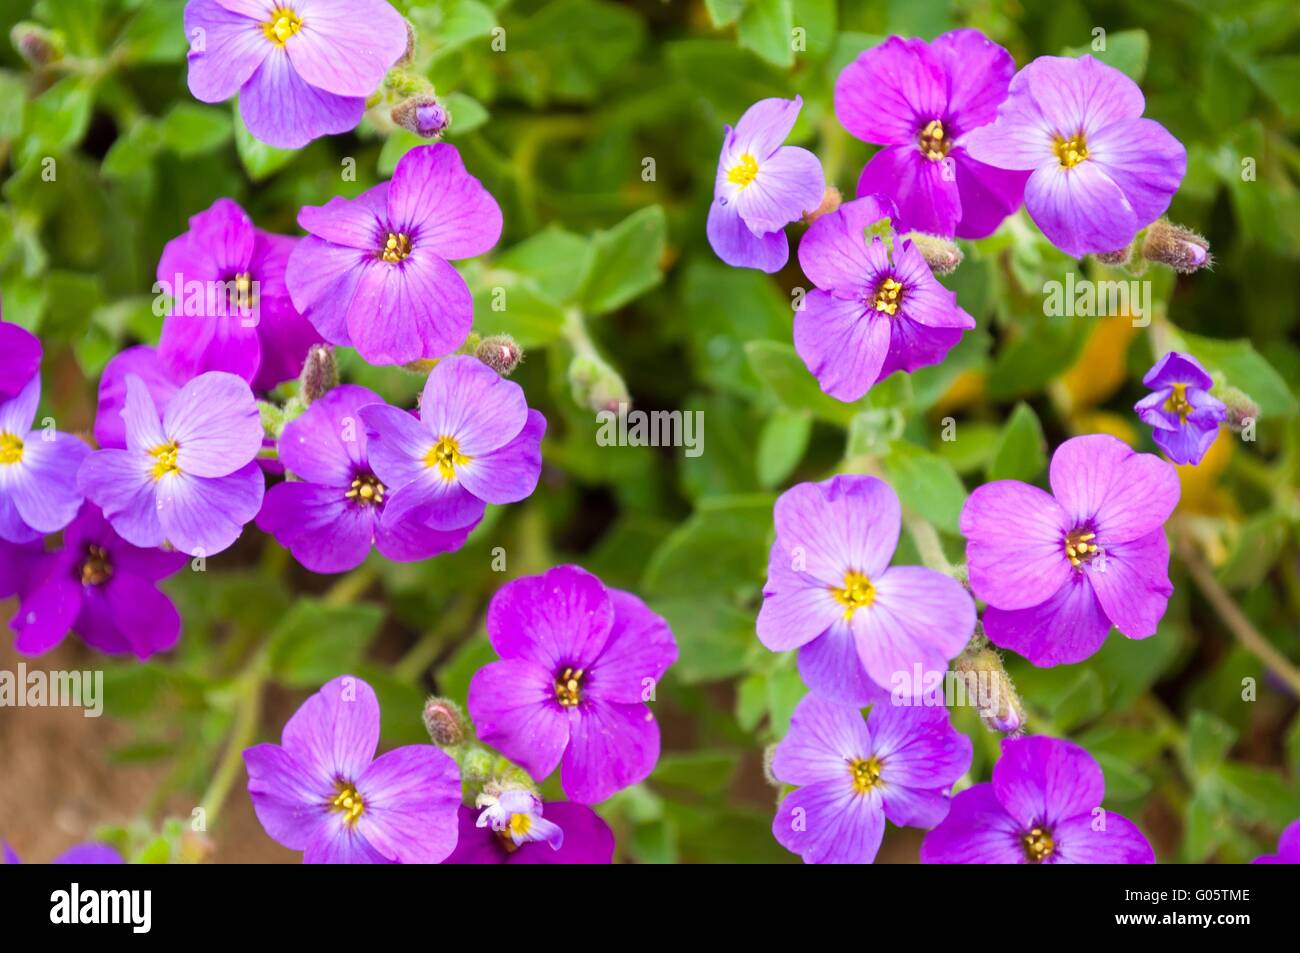 Close up of purple blossoms of Aubrieta flowers in a garden Stock Photo